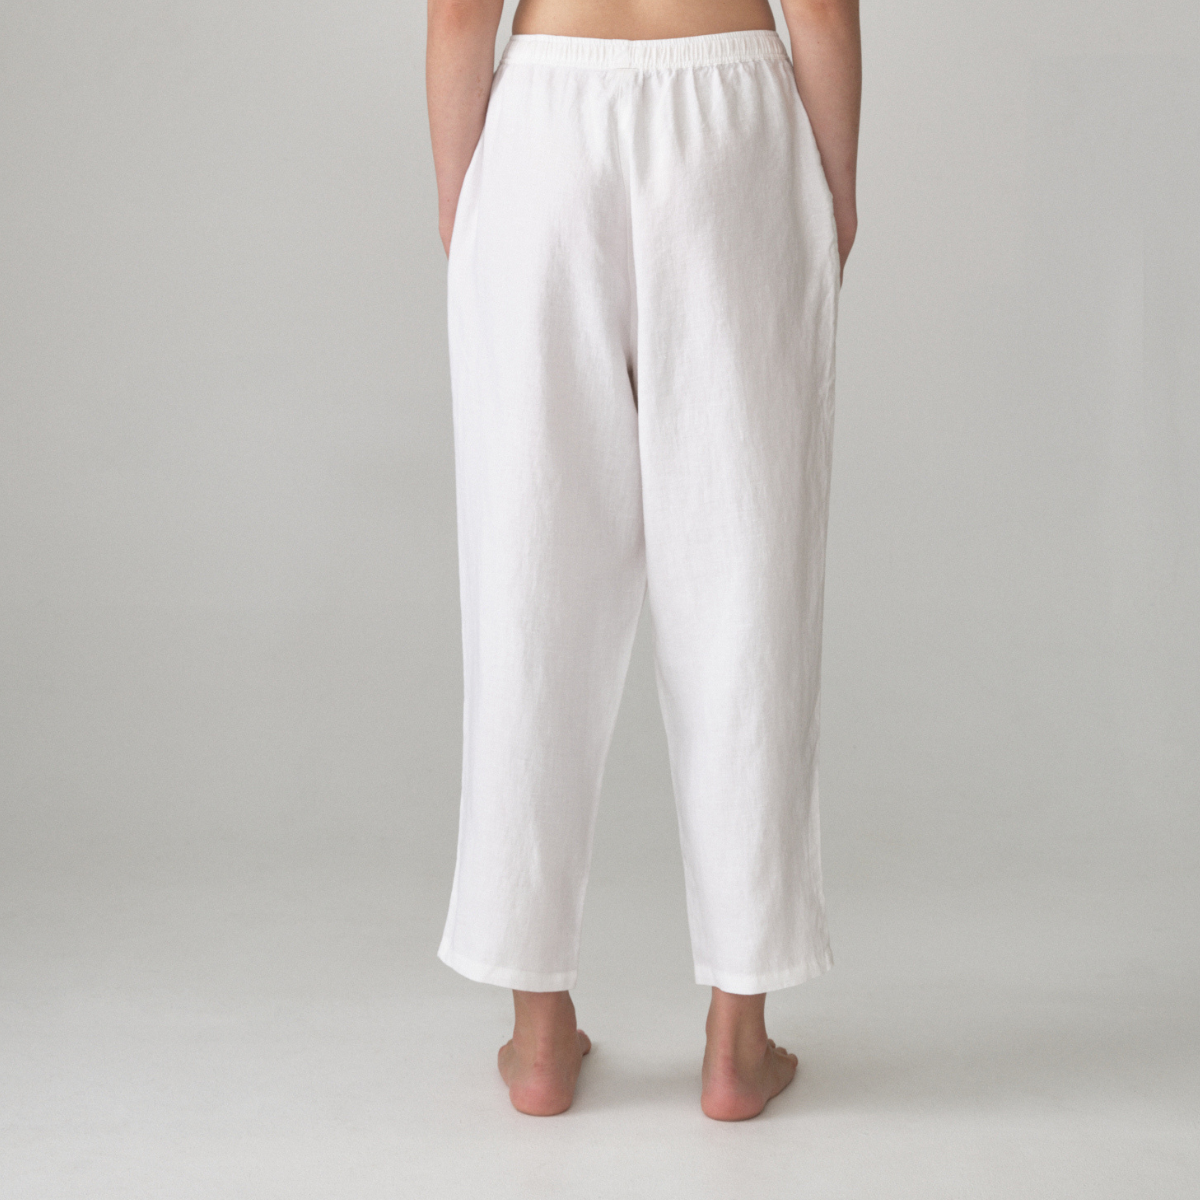 100% Linen Pants in White – IN BED Store